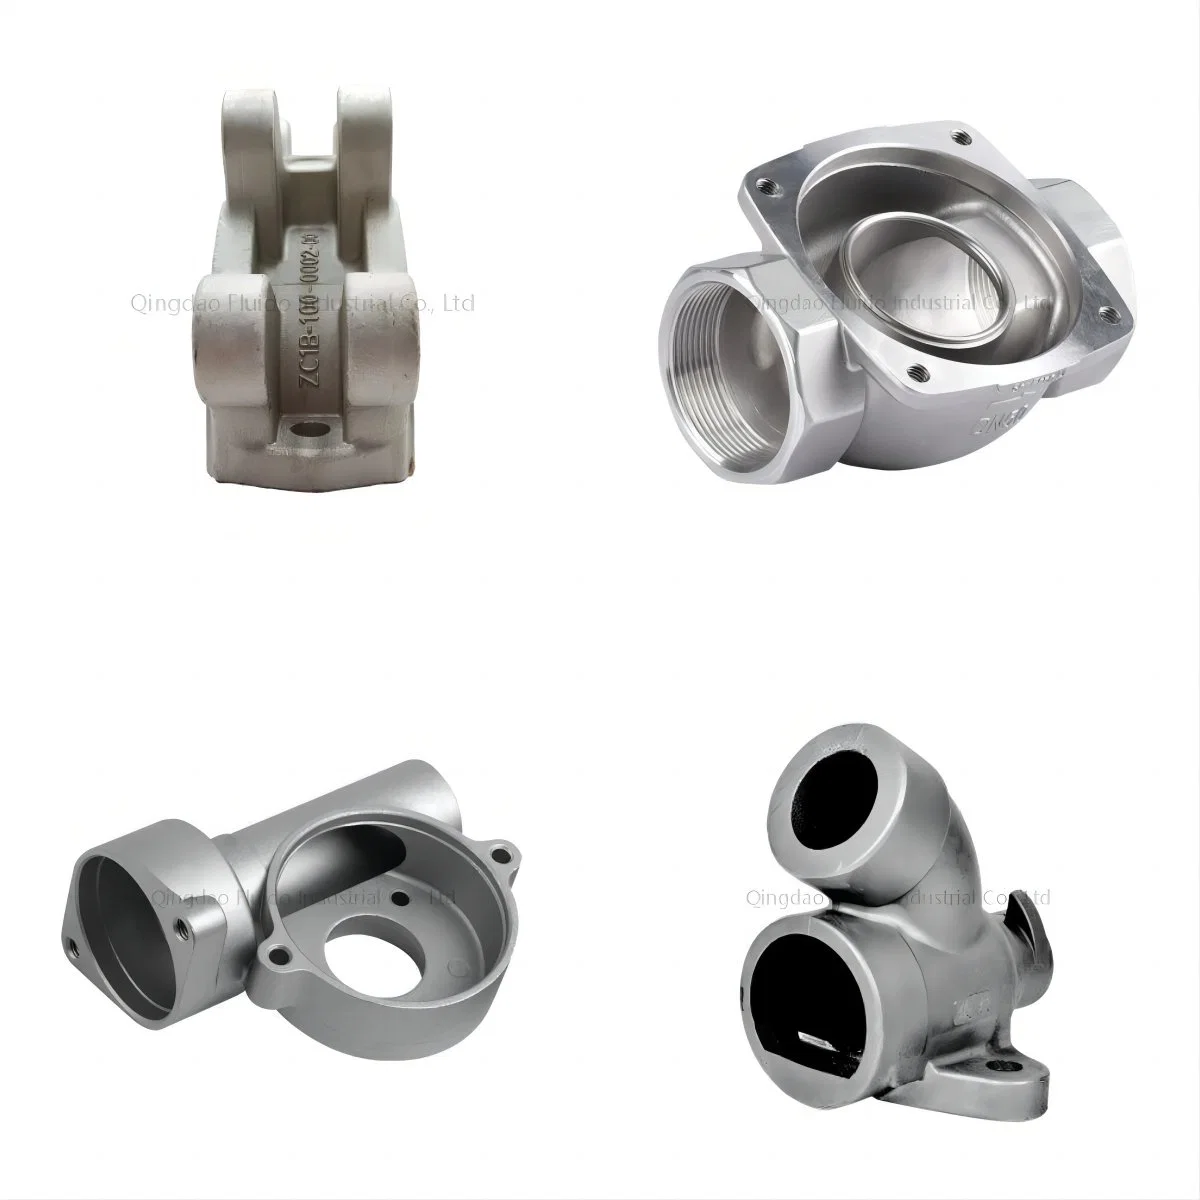 OEM China Factory Foundry Metal Silica Sol/Lost Wax-Investment-Precision-Precise-Alloy /Carbon /Metal/Stainless Steel Casting